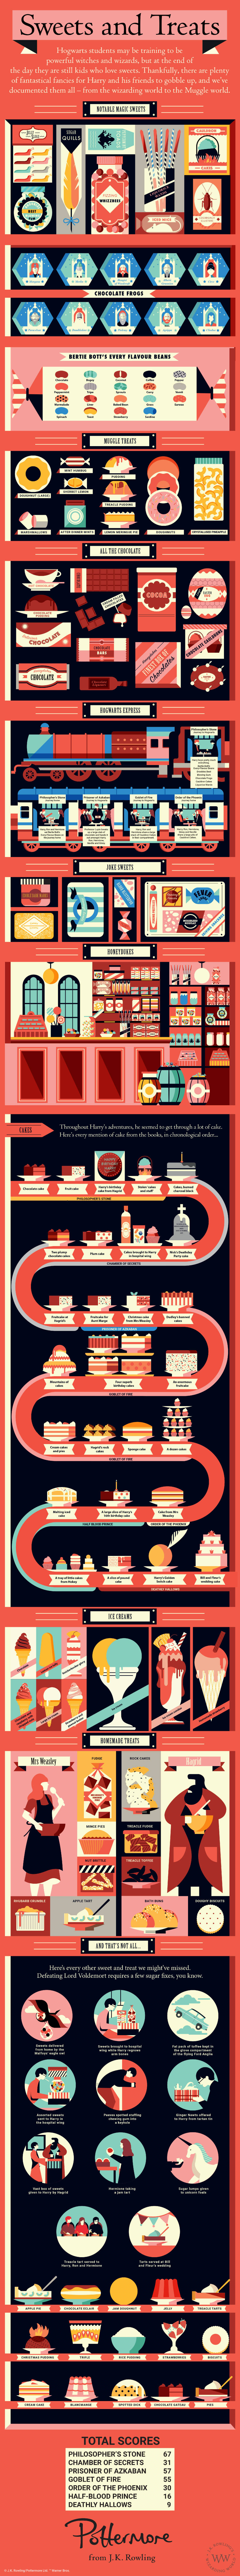 PMARCHIVE-Sweets and Treats infographic yFWSW7qLzEu8gUuEcuiO0-b1